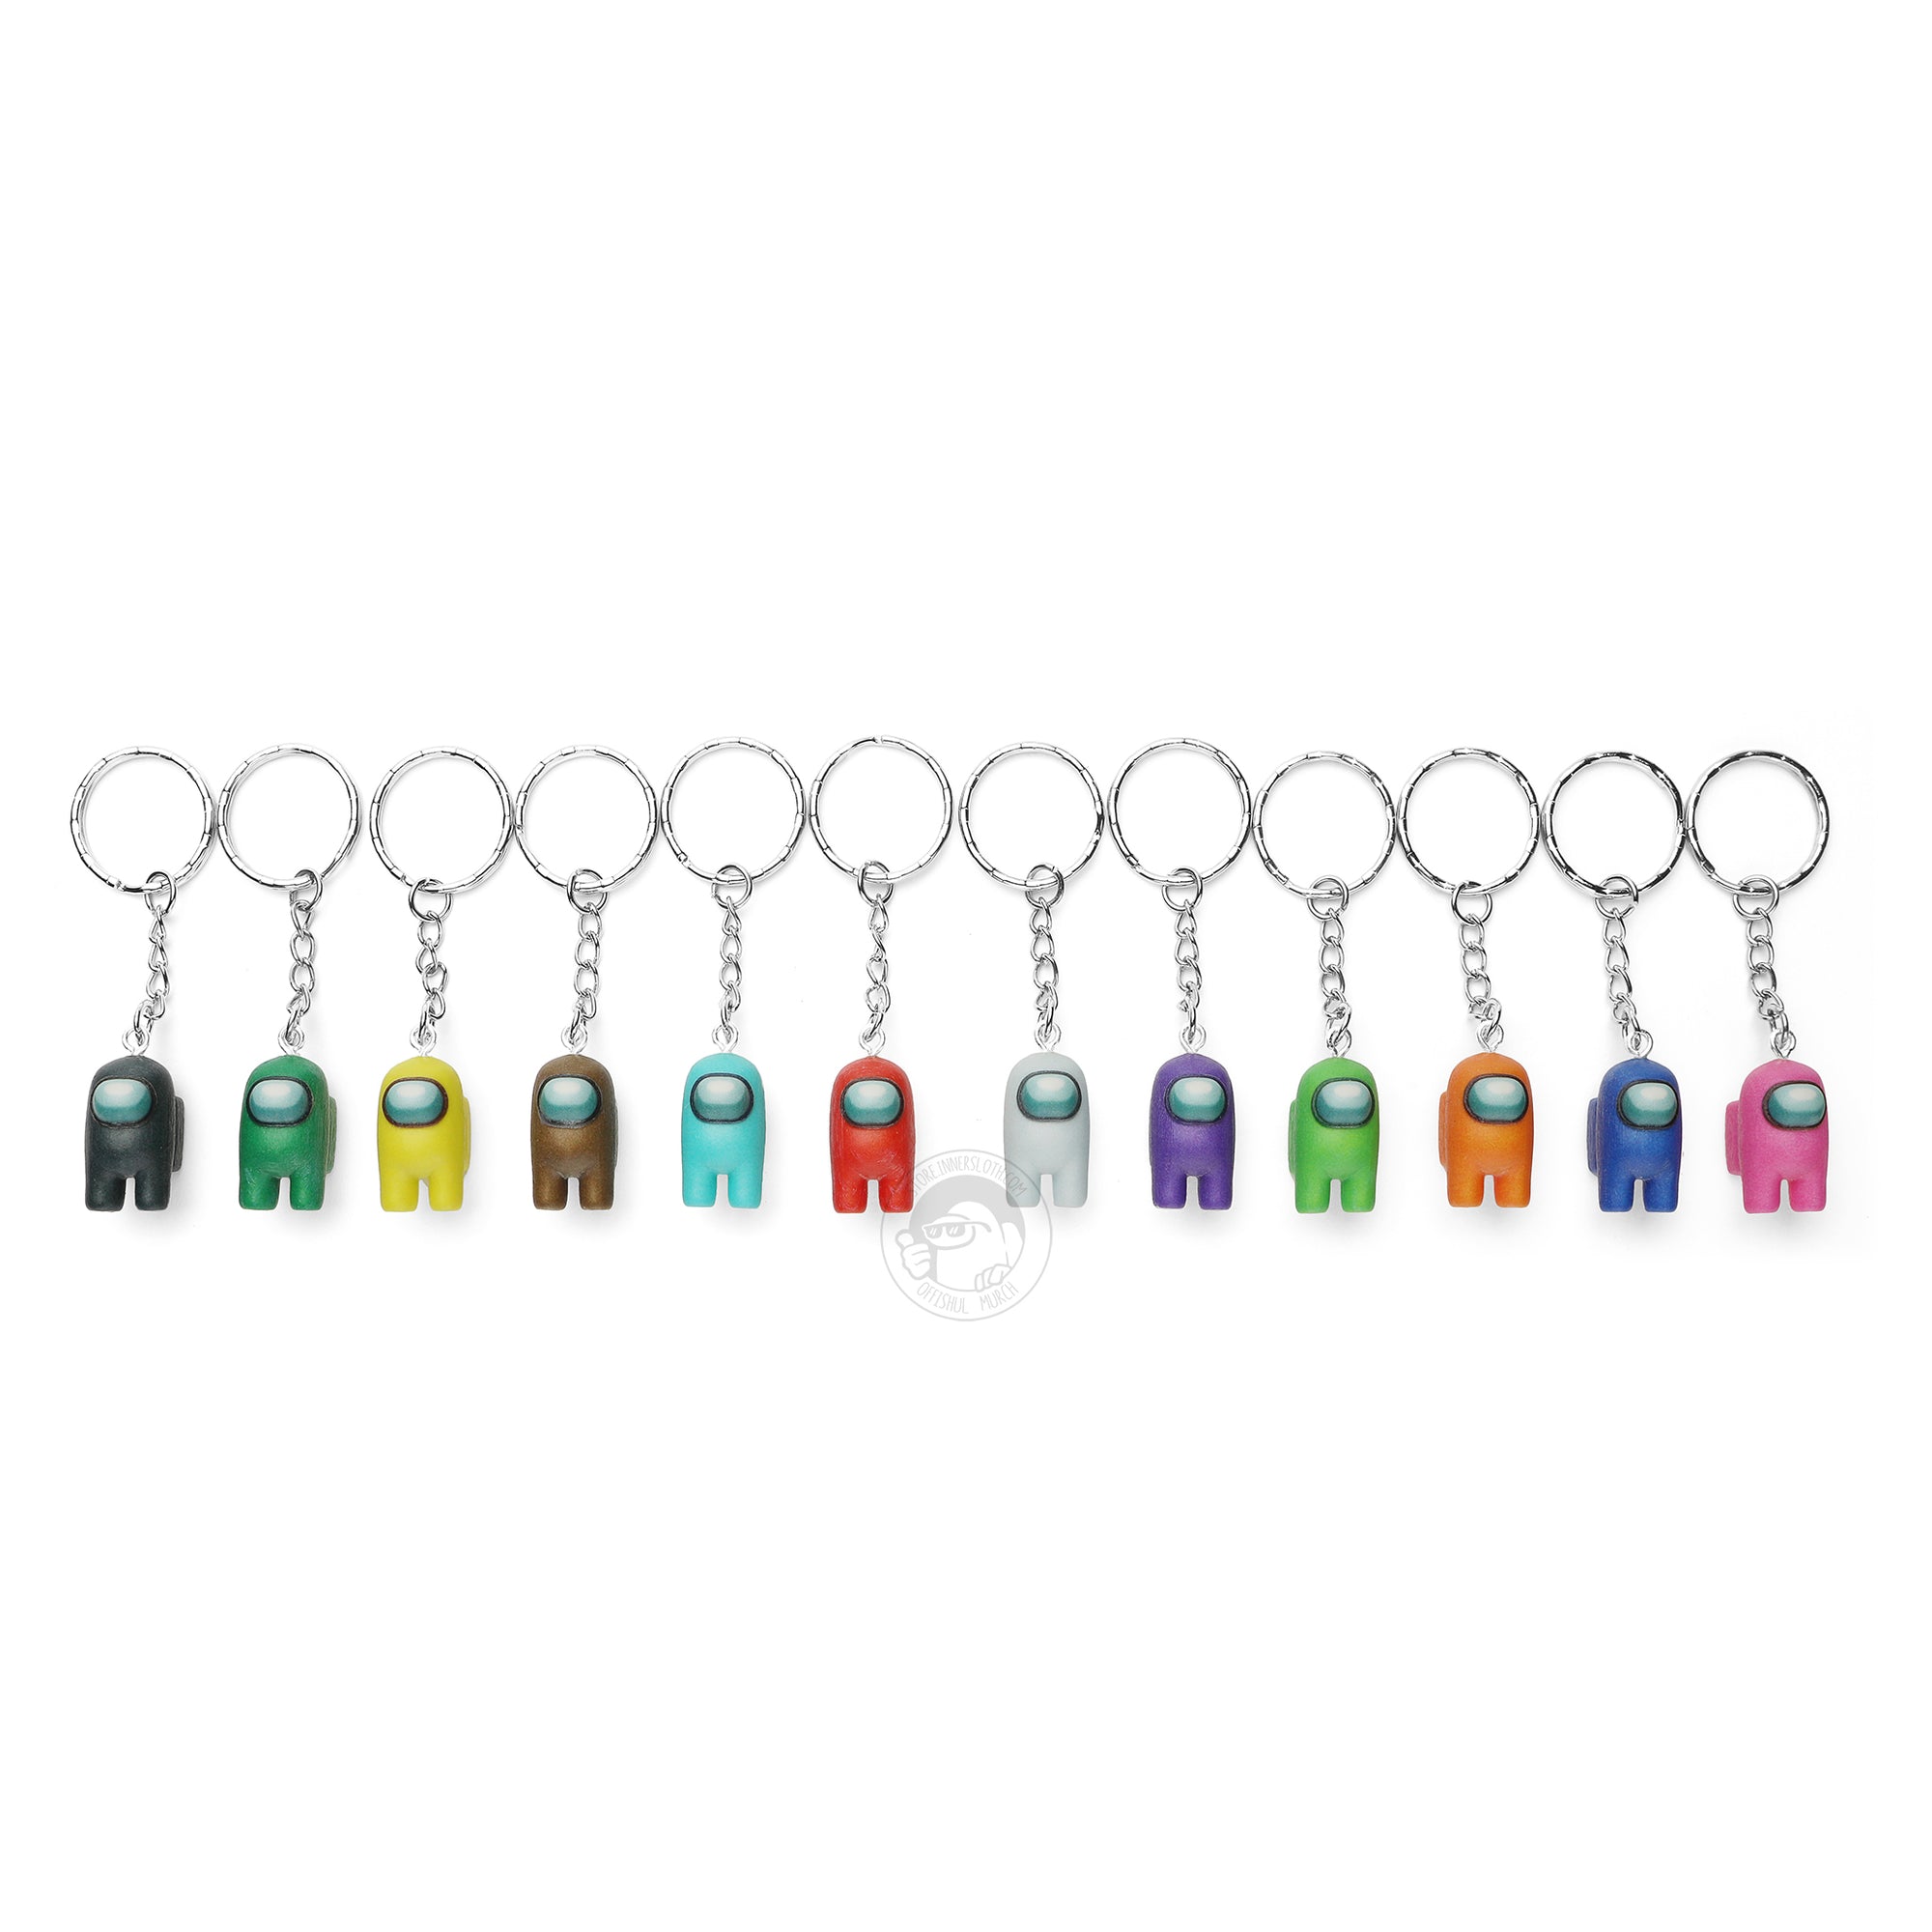 A product photo of all twelve variant colors of the Among Us: Crewmate Keychain by Objex Unlimited Inc. They are laying diagonally across the photo and each has a silver keychain. The colors are as follows: black, green, yellow, brown, cyan, red, white, purple, lime, orange, blue, and pink.